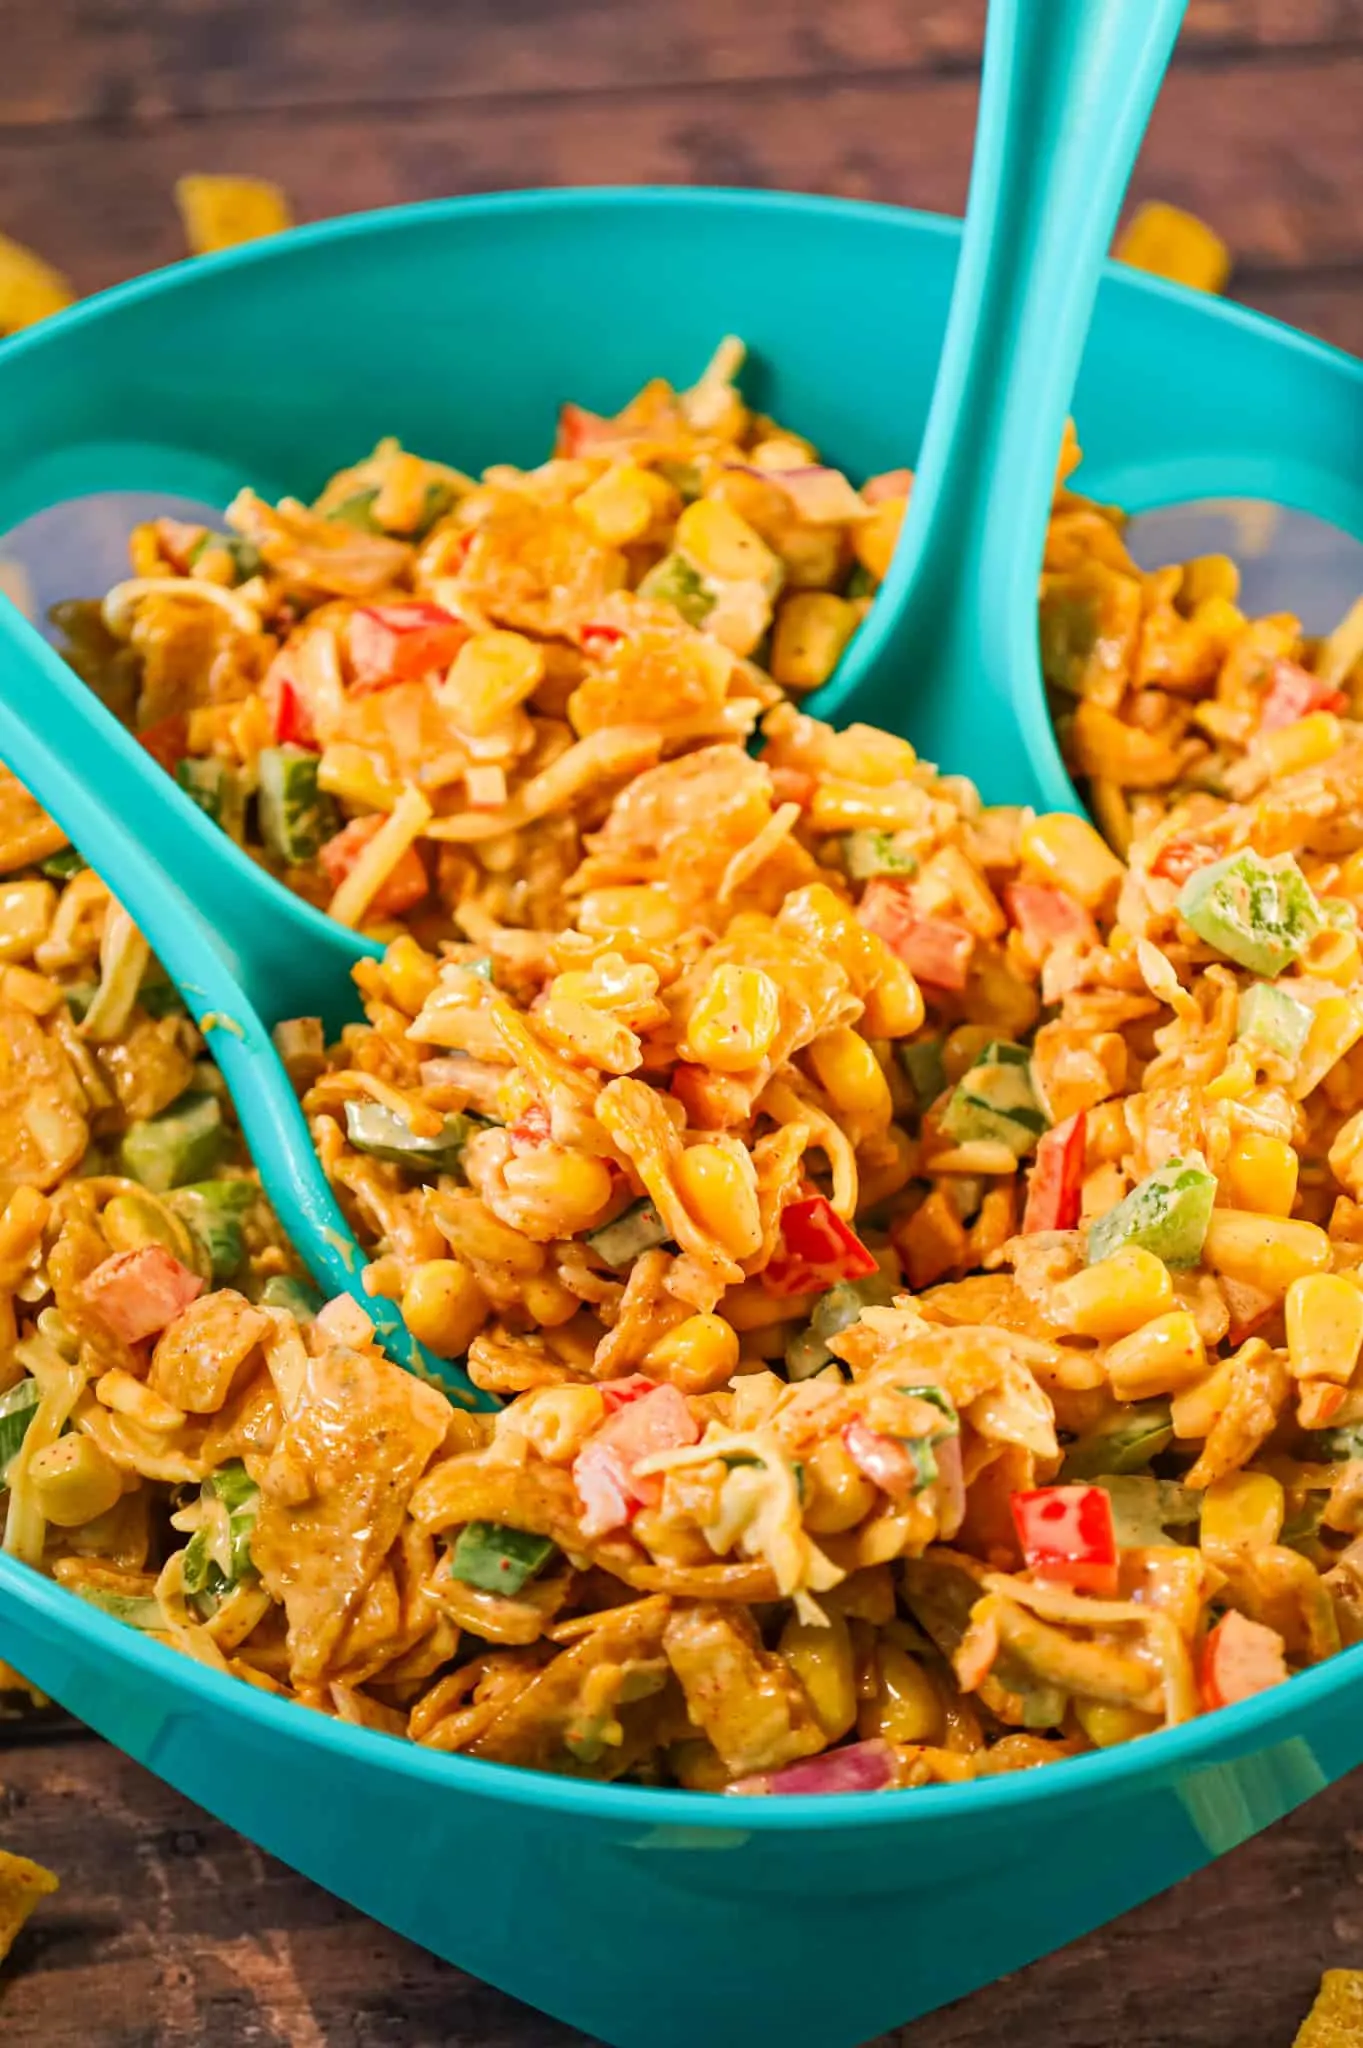 Frito Corn Salad is a delicious side dish recipe loaded with corn, diced bell peppers, onions, shredded cheese and corn chips all tossed in a creamy mixture of mayo, ranch dressing and taco seasoning.